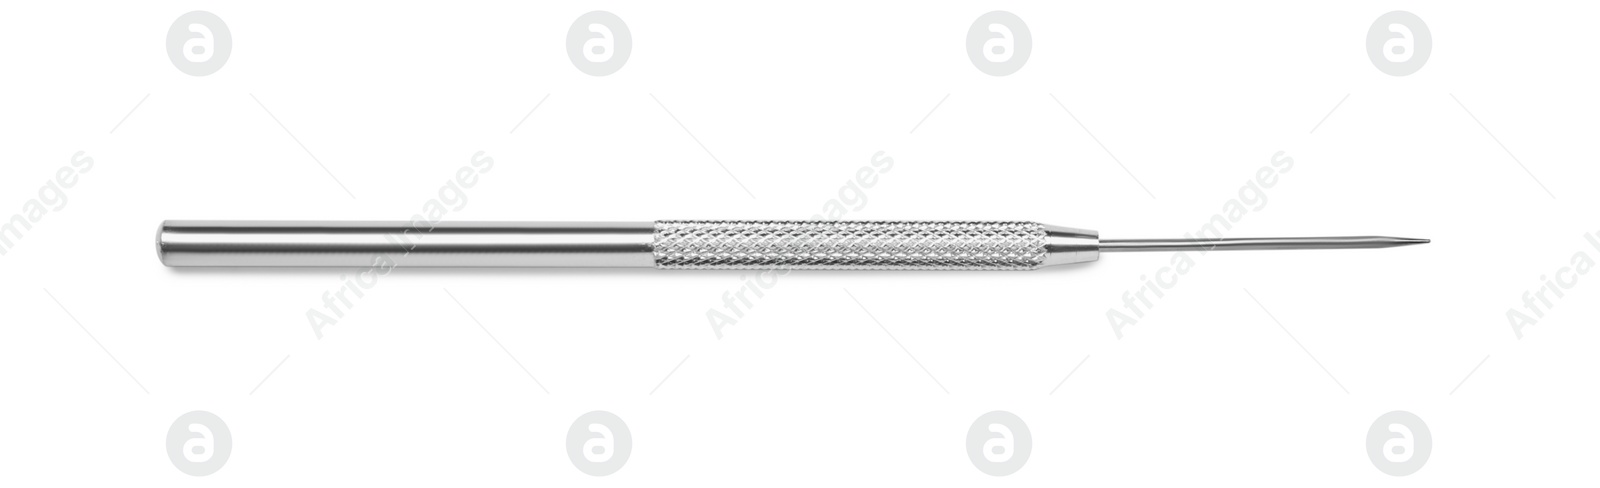 Photo of Stainless steel needle for clay modeling isolated on white, top view